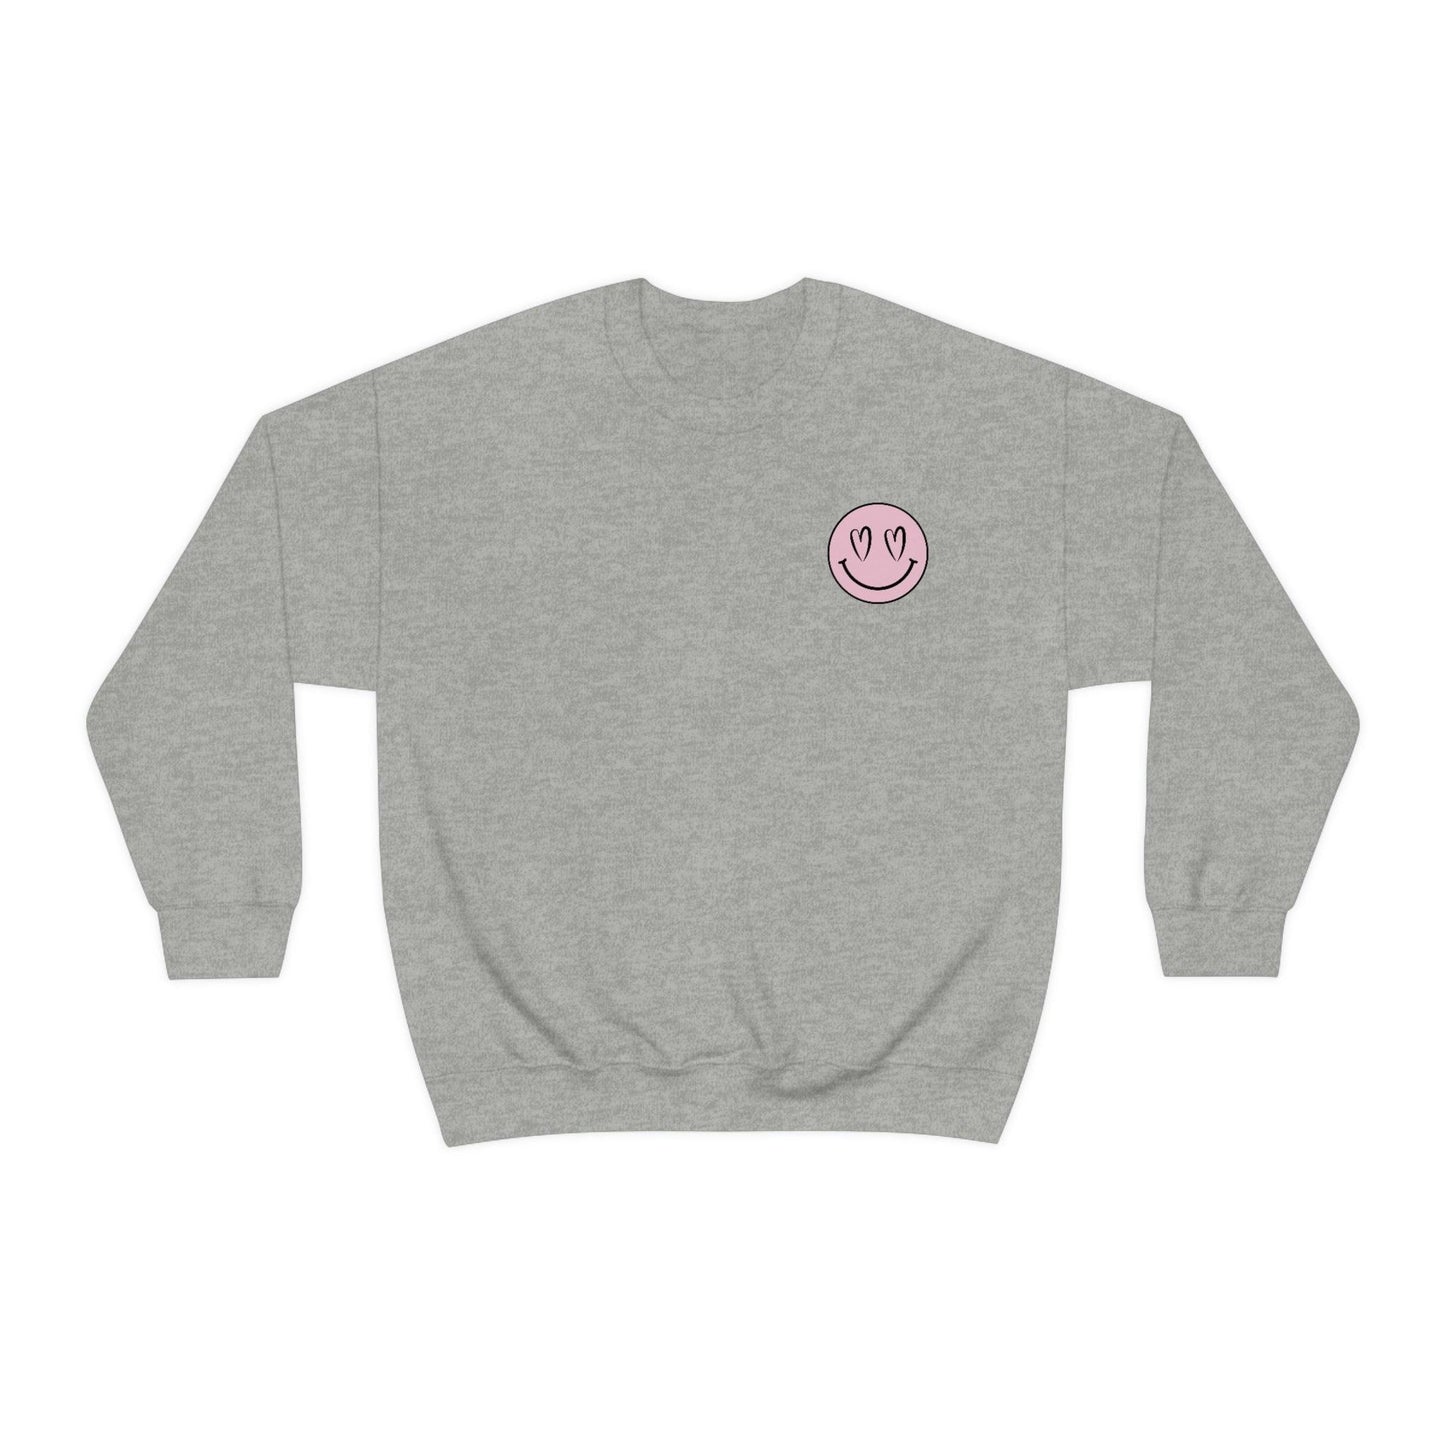 Protect Your Peace Crewneck Sweatshirt (This is a FRONT POCKET & REGULAR BACK PRINT)